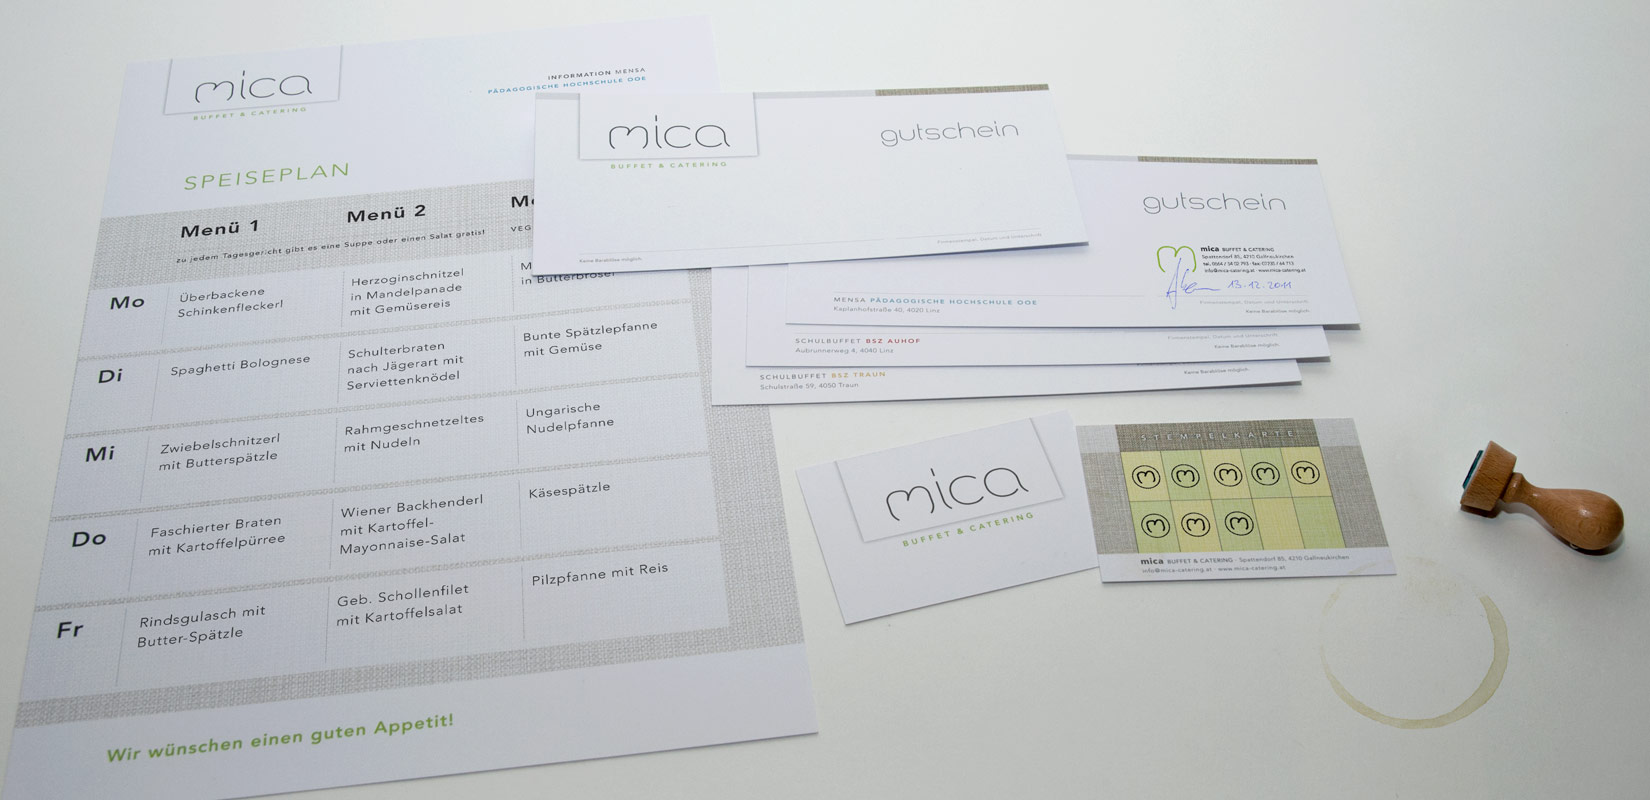 mica Buffet & Catering – Prints